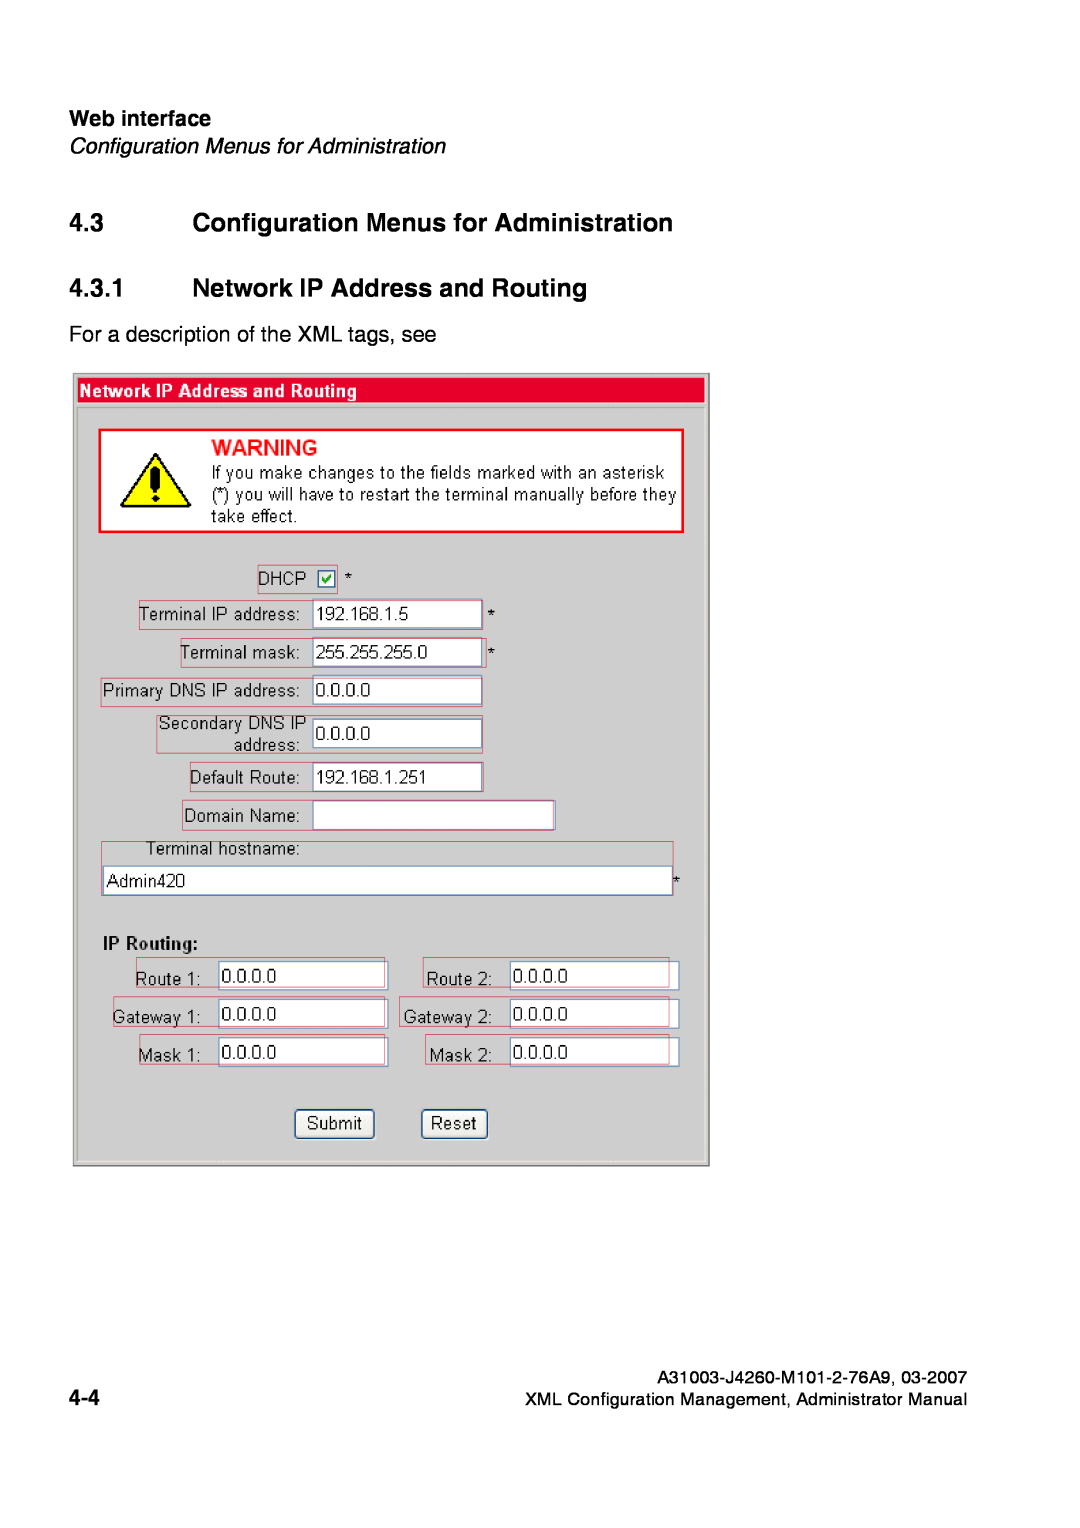 Siemens 420 S V6.0, 410 S V6.0 manual Configuration Menus for Administration, Network IP Address and Routing, Web interface 